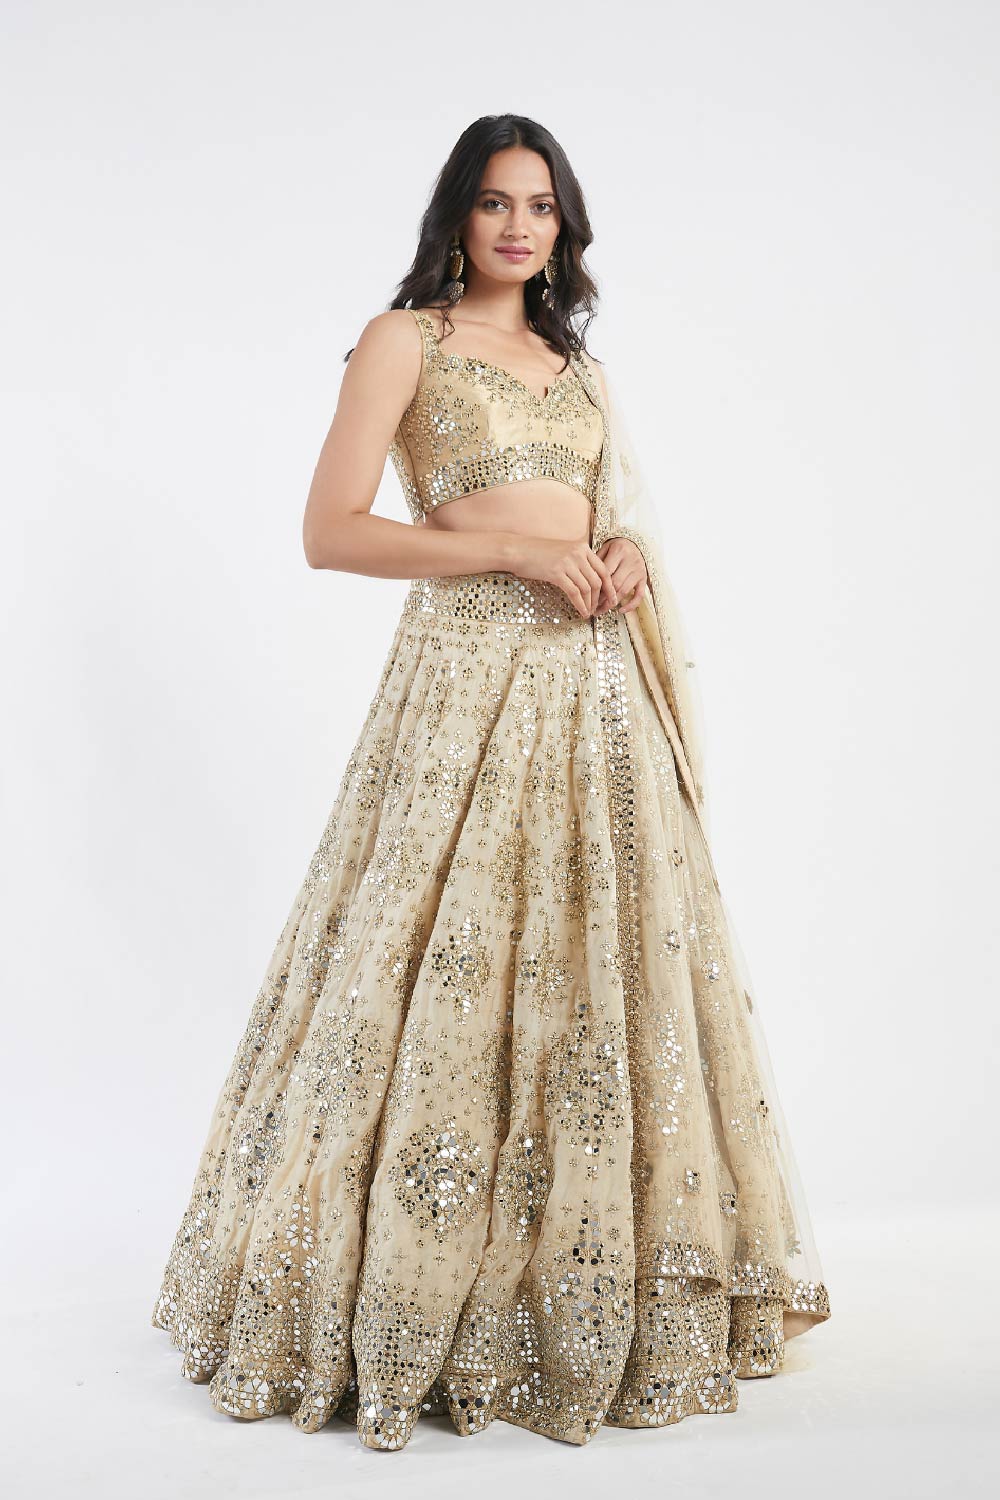 Dilbar by Abhinav Mishra - Spring Couture 2023 There's a sense of magic in  summer weddings. Twirling lehengas that catch the sun in a th... | Instagram